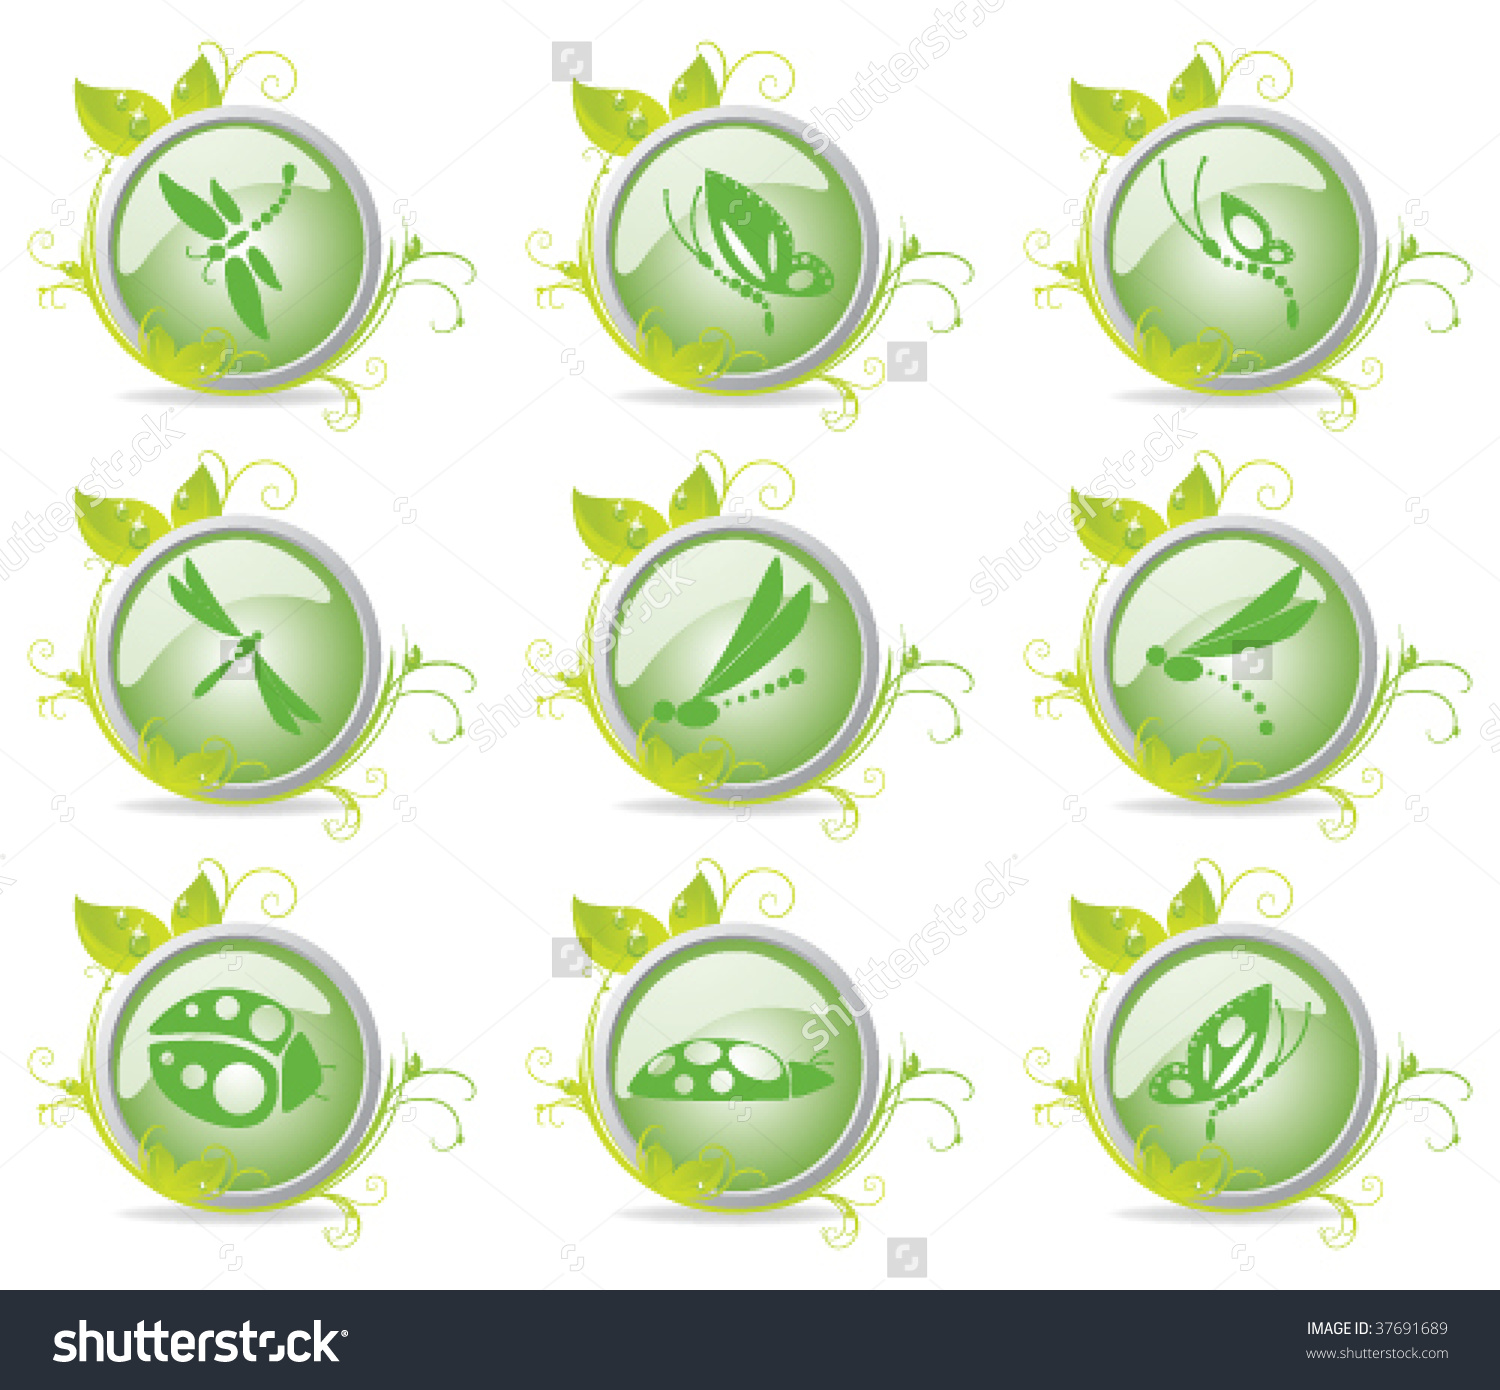 Nine Ecological Insect Icons Surrounded By Dewdrop Leaves And Airy.